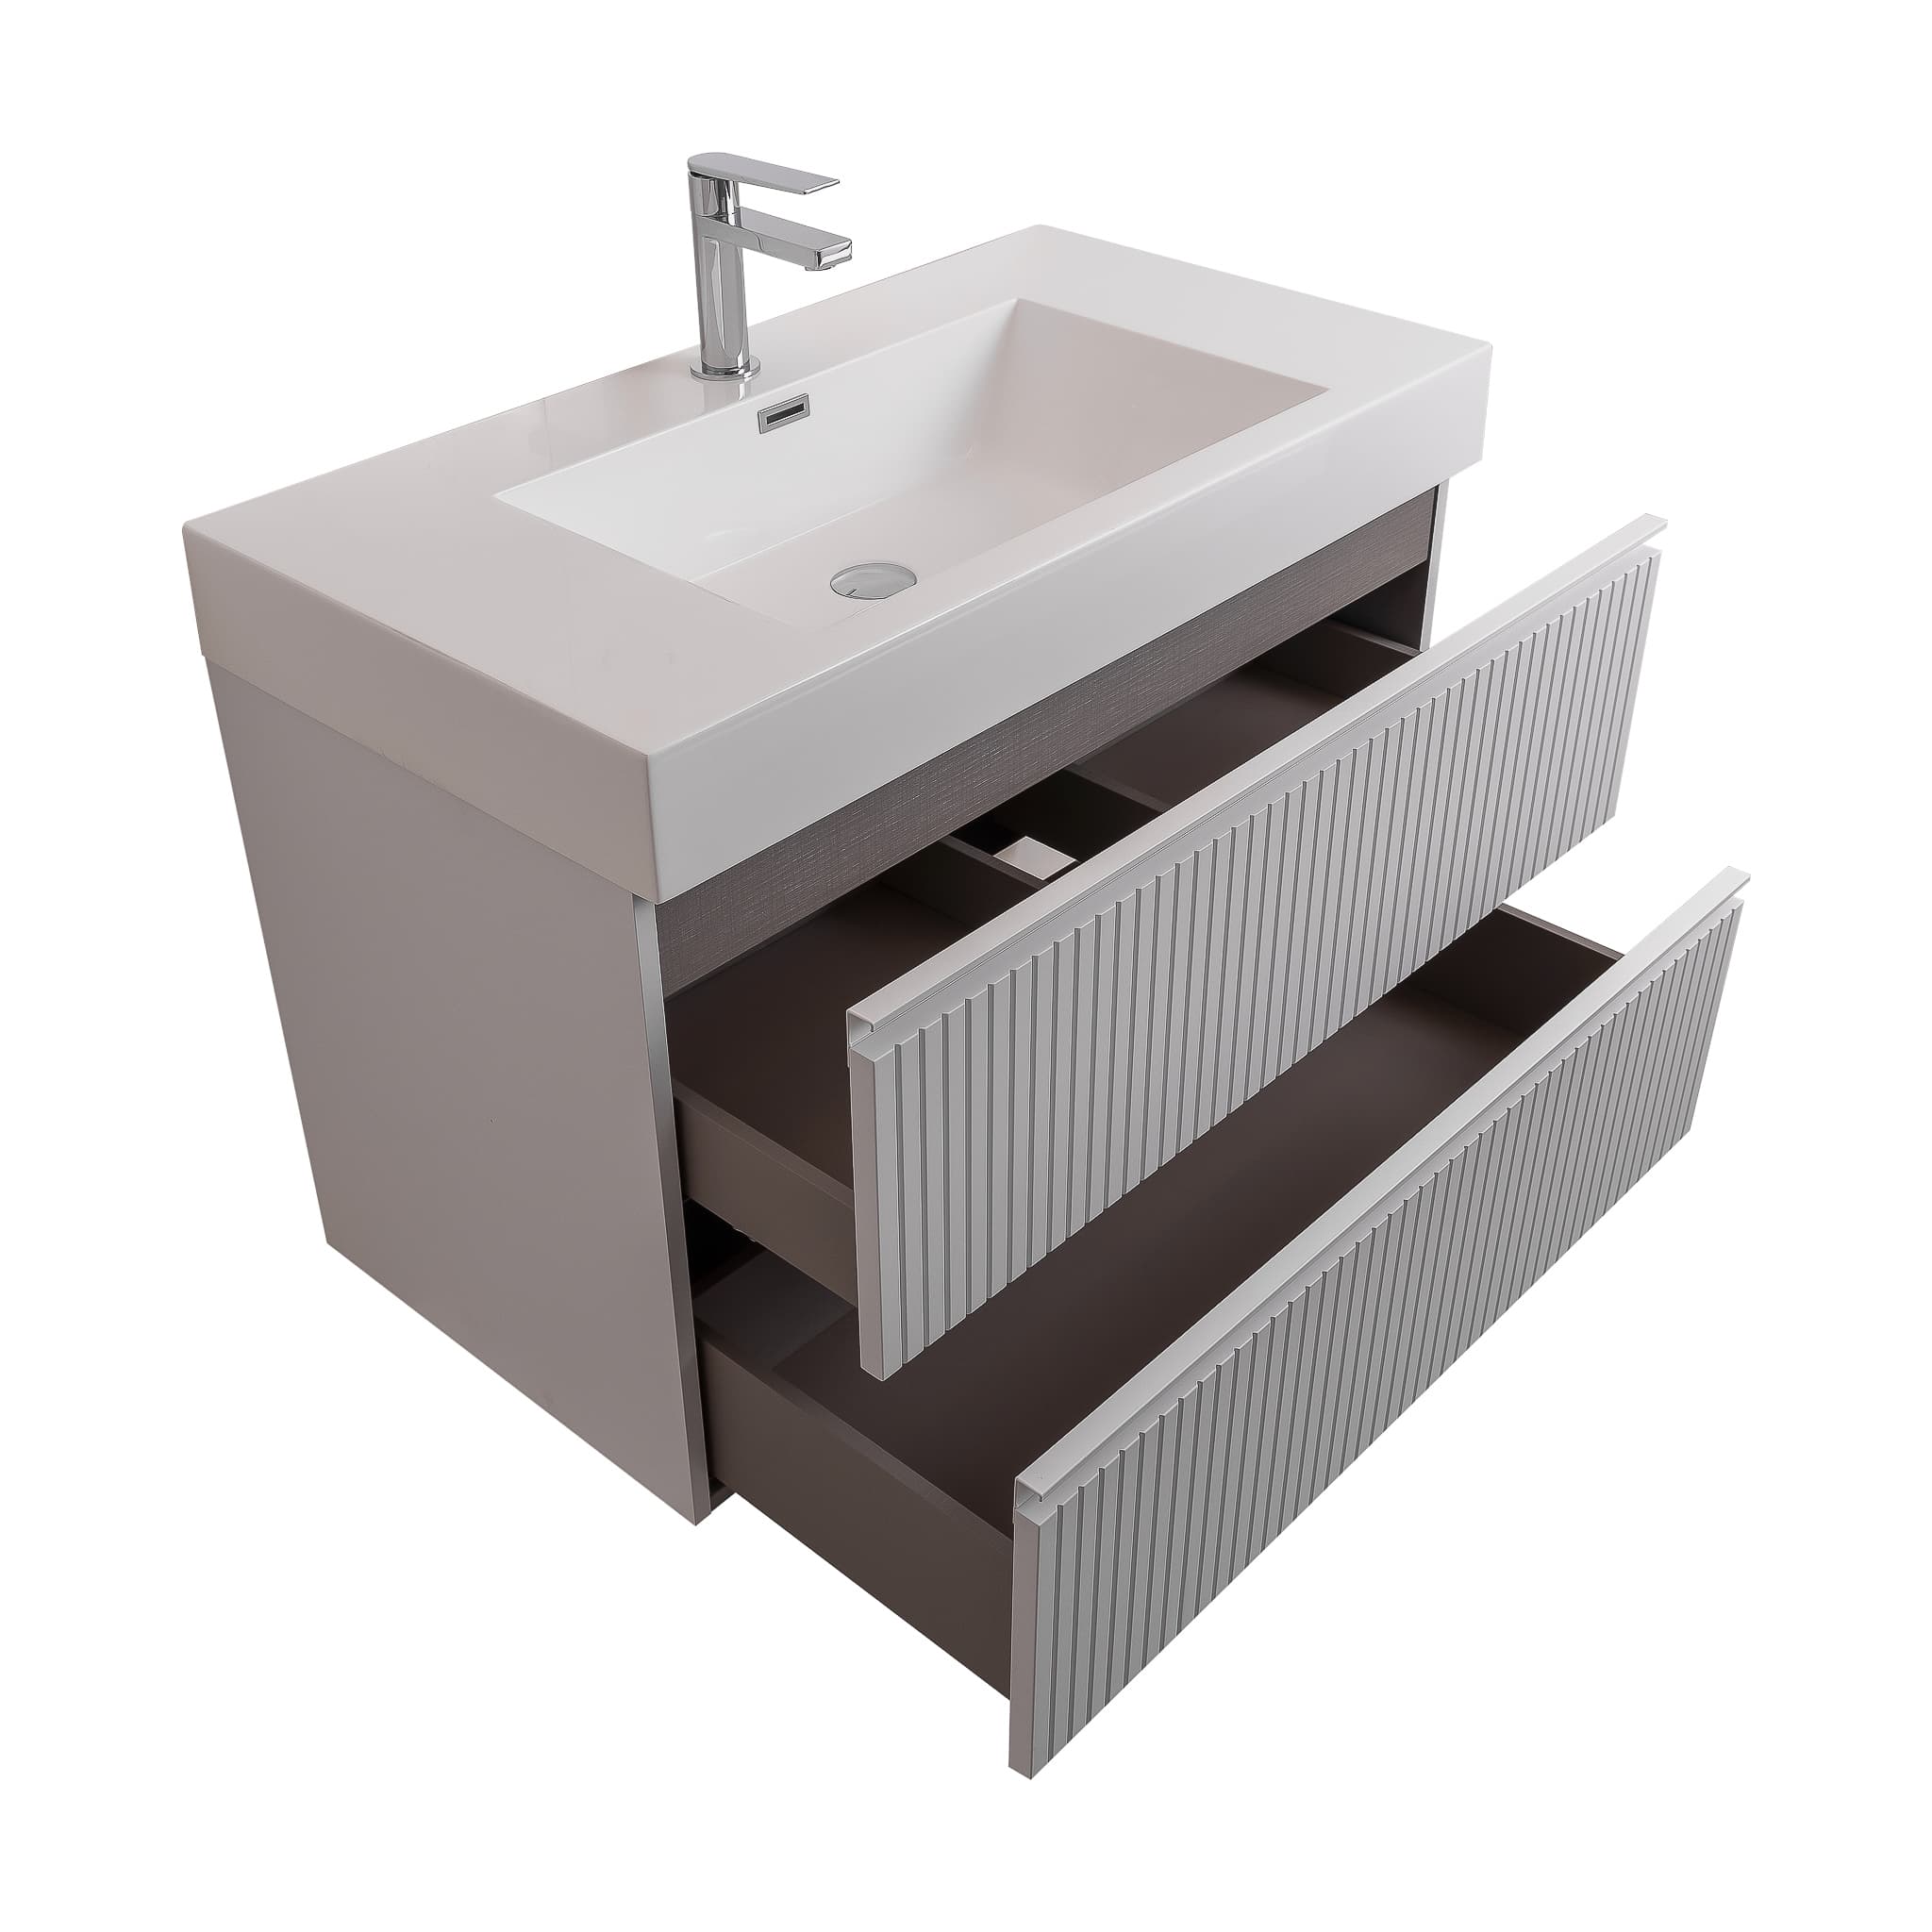 Ares 39.5 Matte White Cabinet, Square Cultured Marble Sink, Wall Mounted Modern Vanity Set